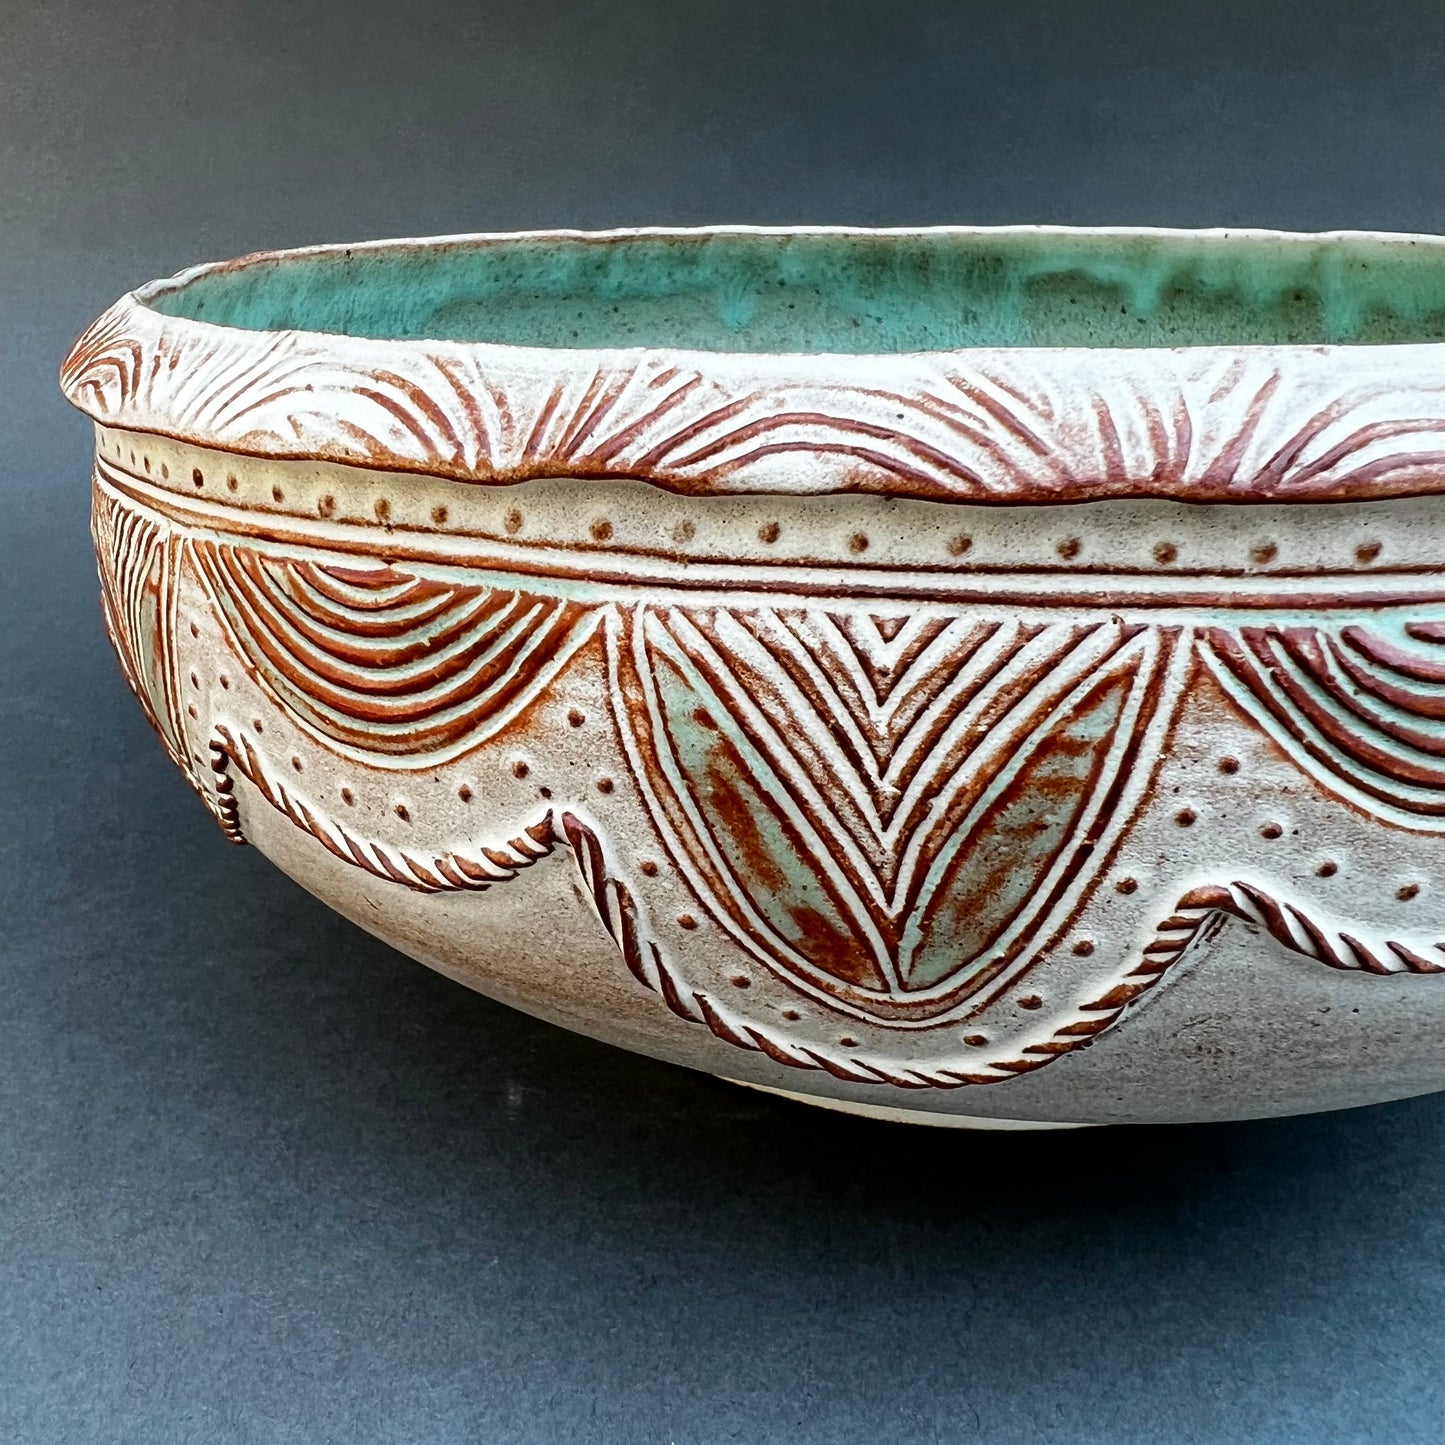 Coil Decorated Serving Bowl